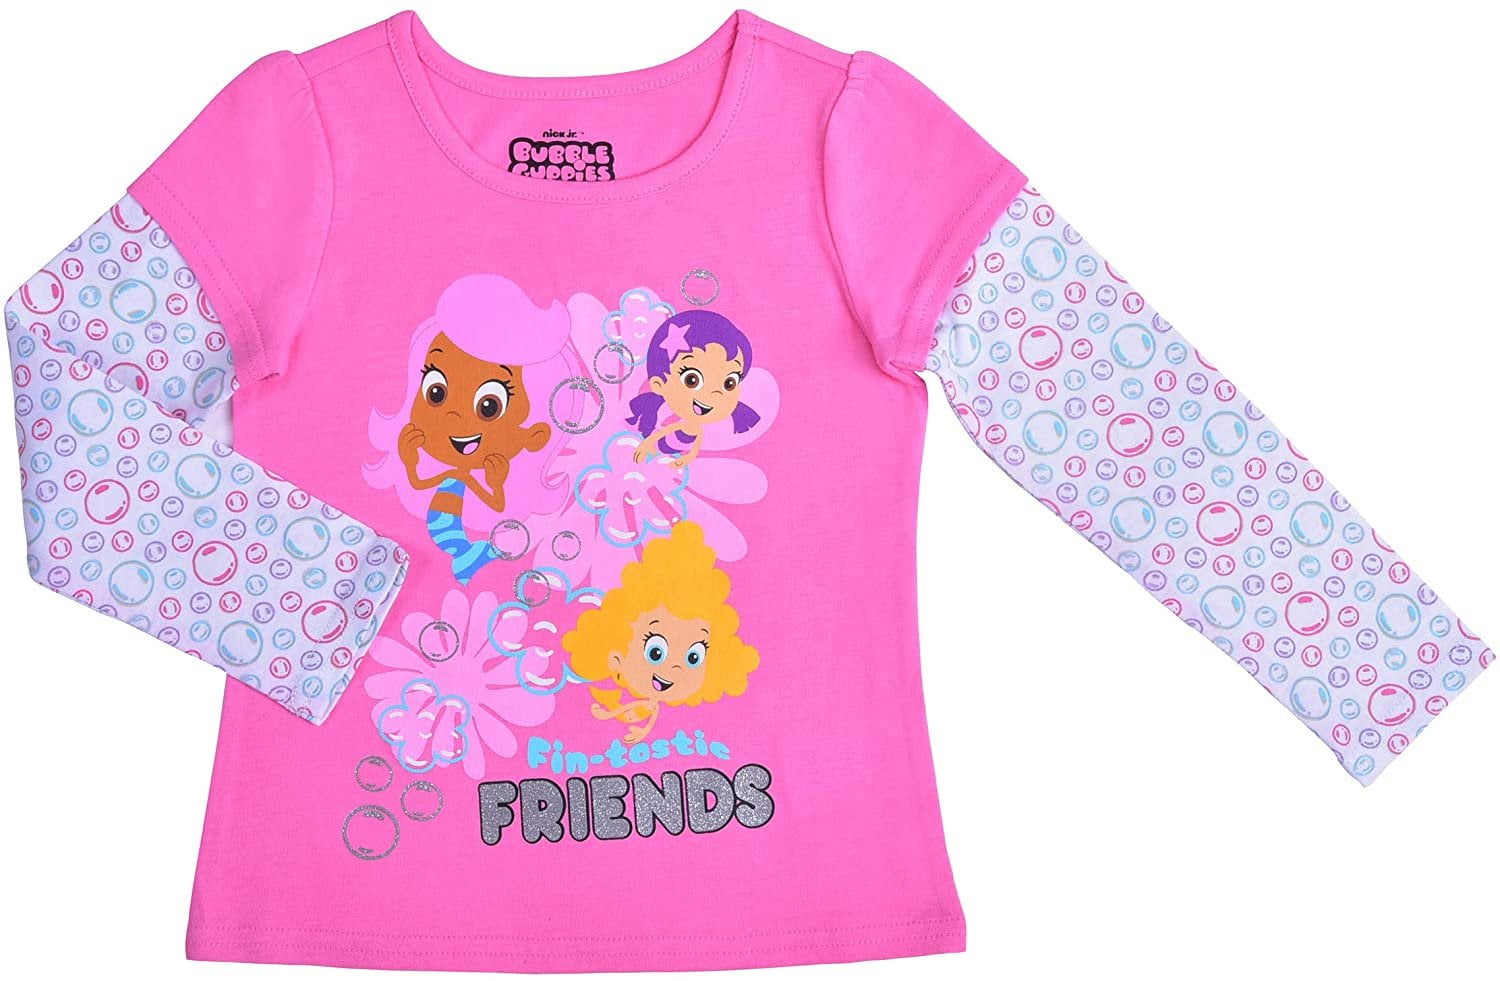 Bubble Guppies Toddler Girl Pink Shirt and Leggings Outfit Set New 3T 